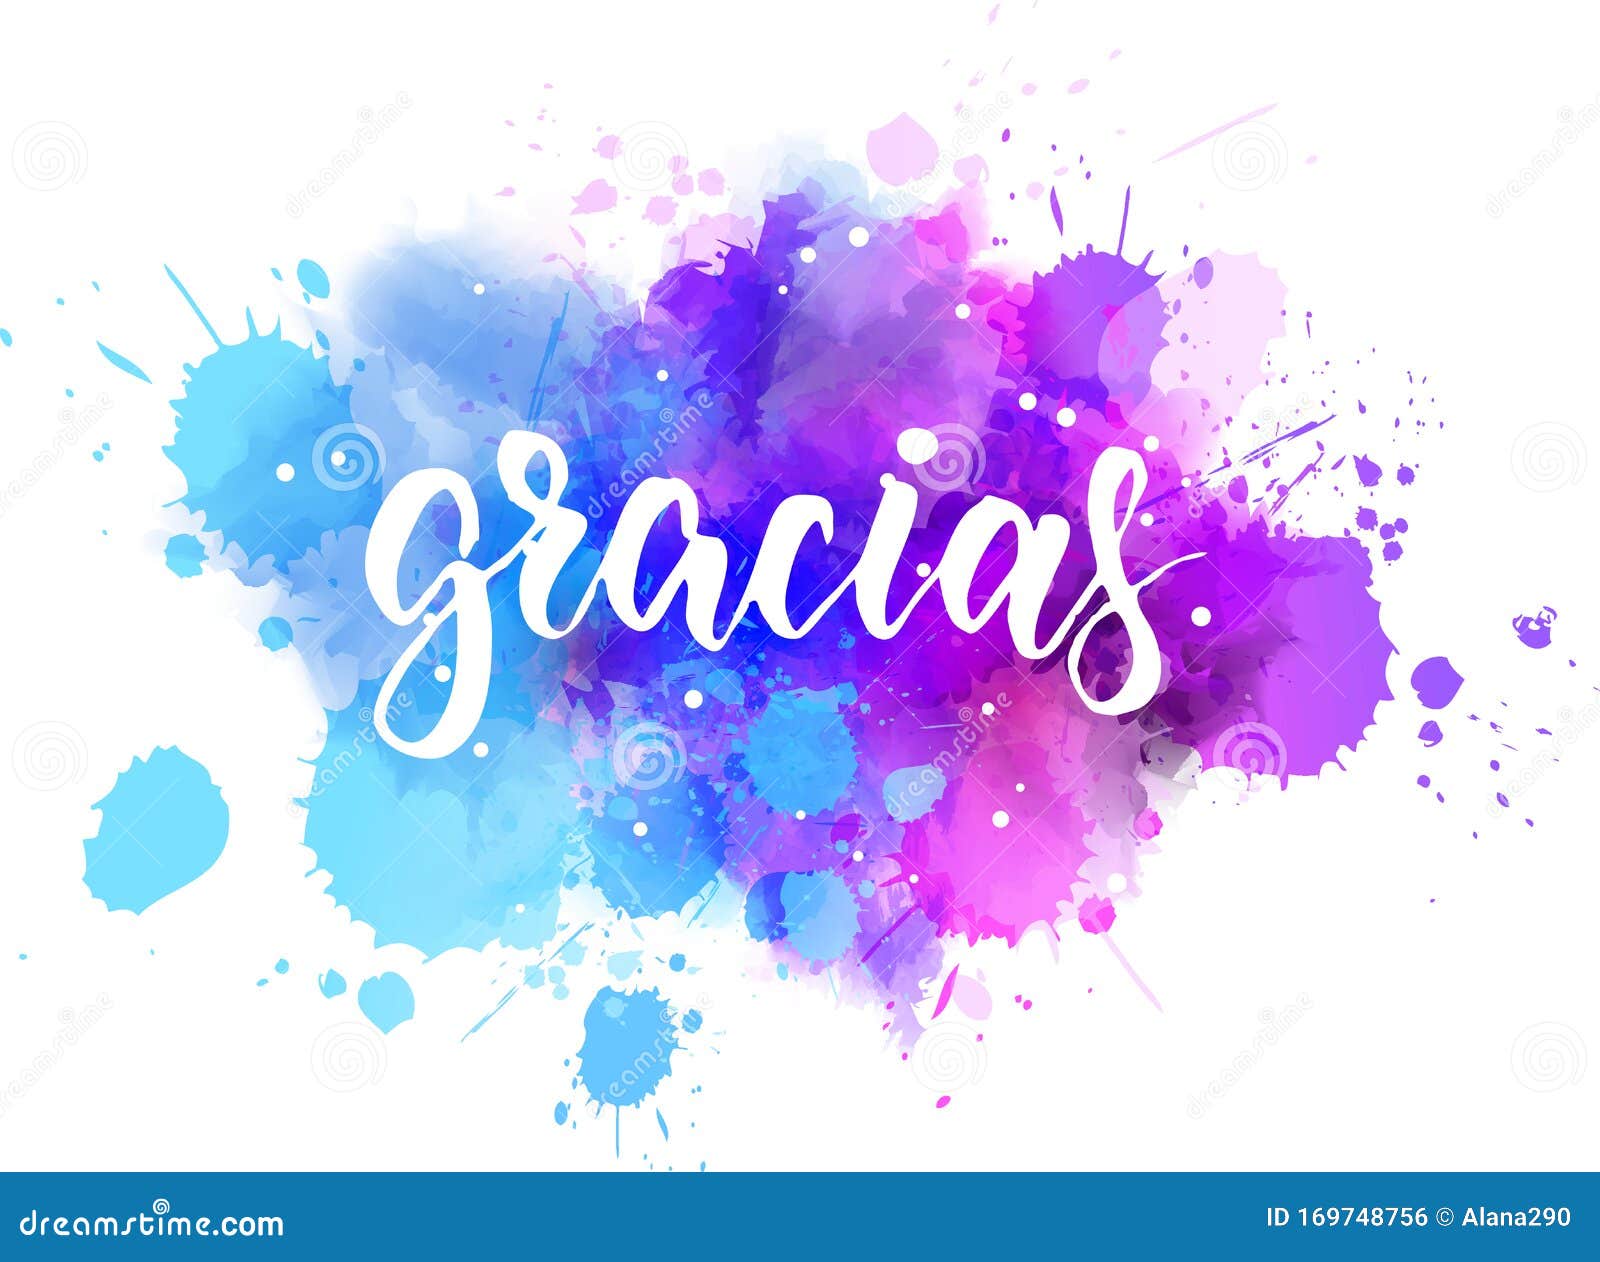 Gracias Lettering on Watercolor Background Stock Vector - Illustration ...